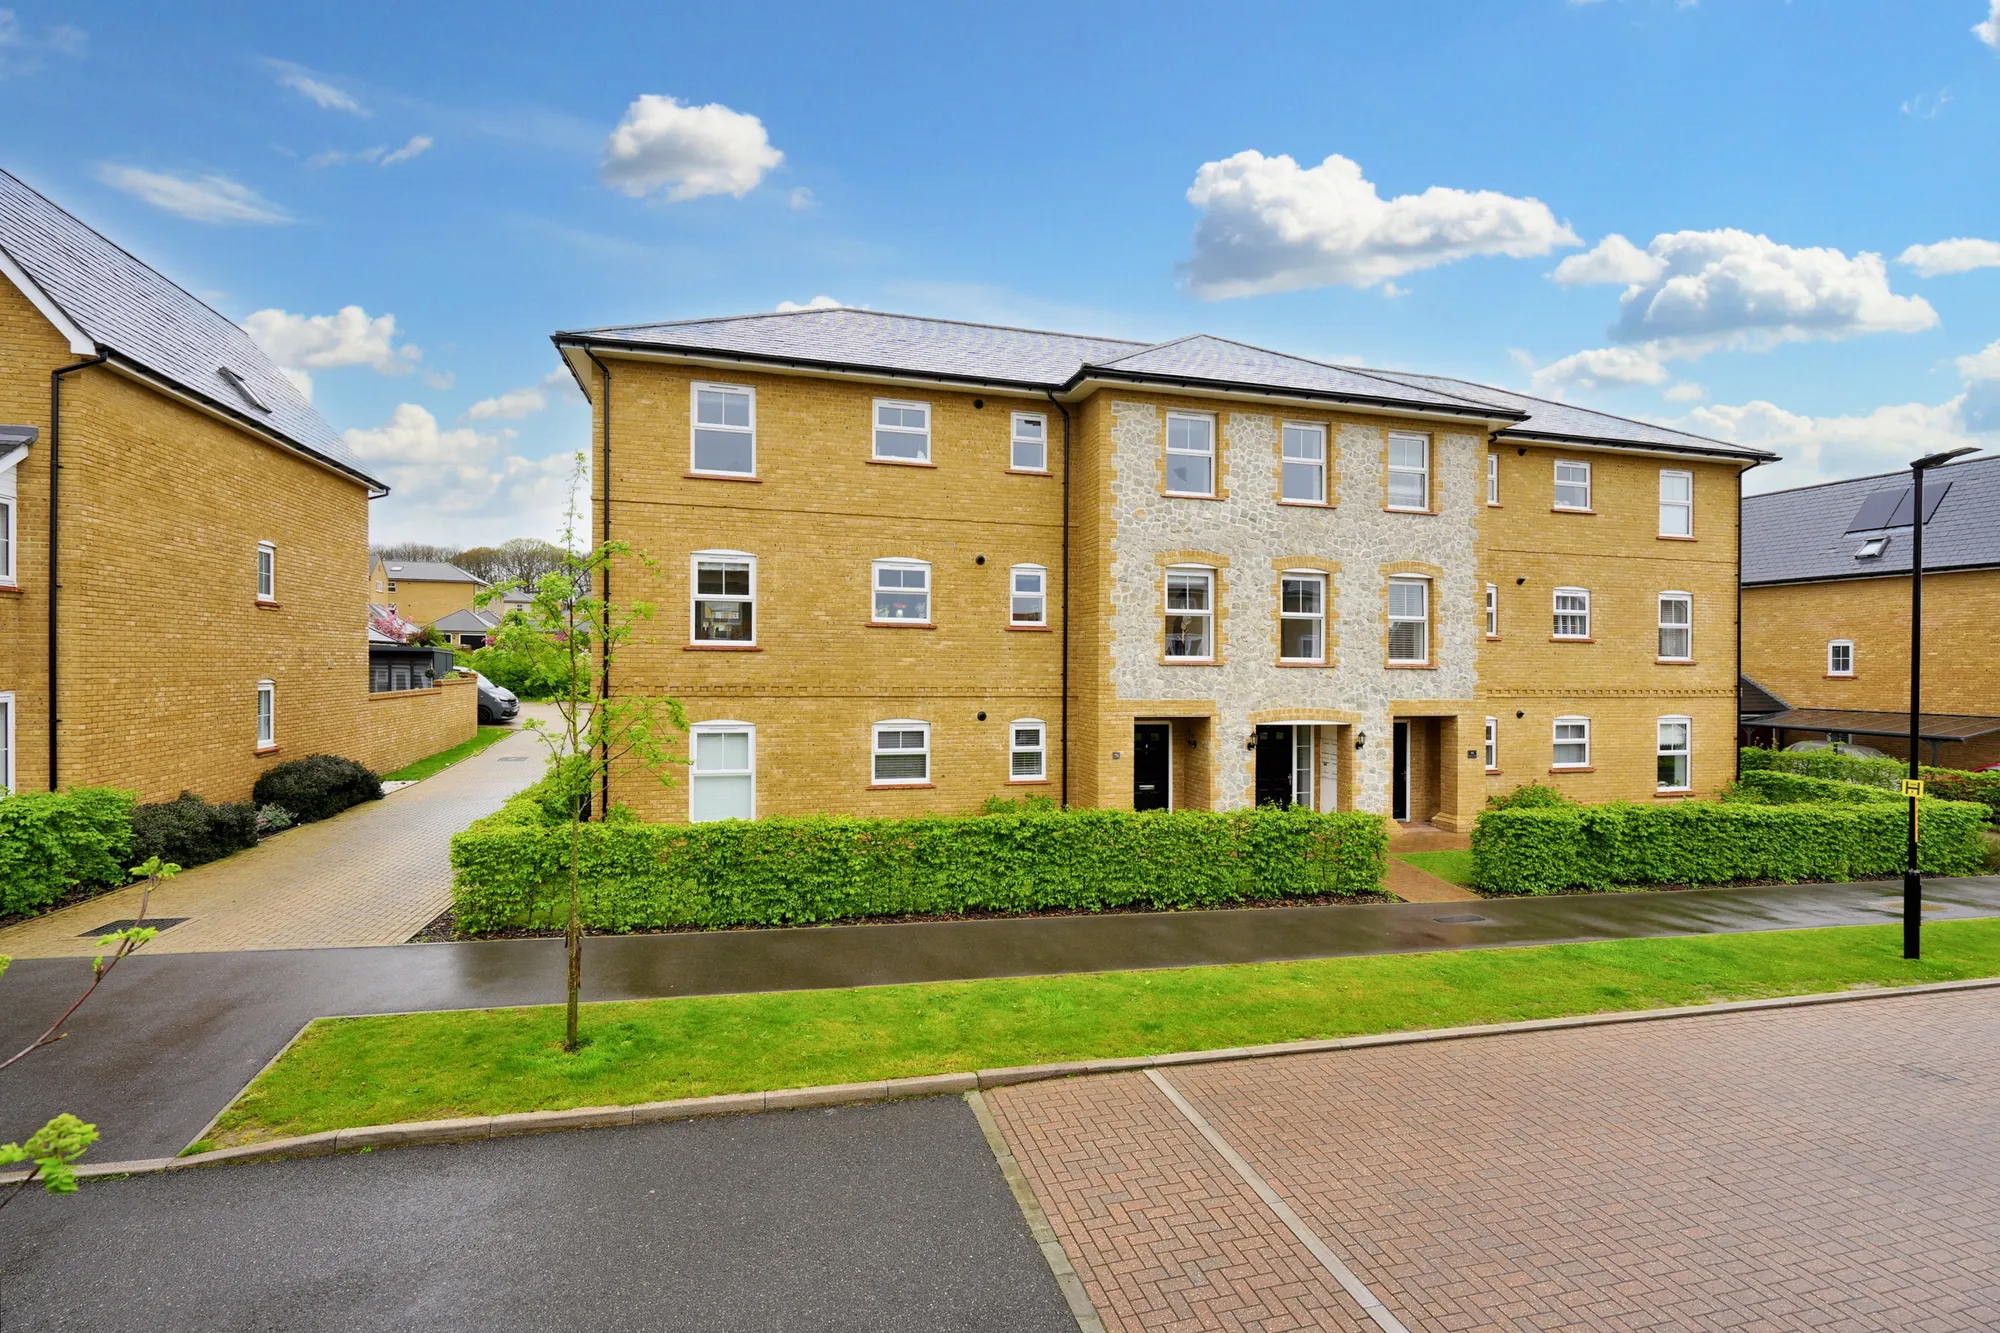 2 bed flat for sale in Cranford Road, Maidstone - Property Image 1